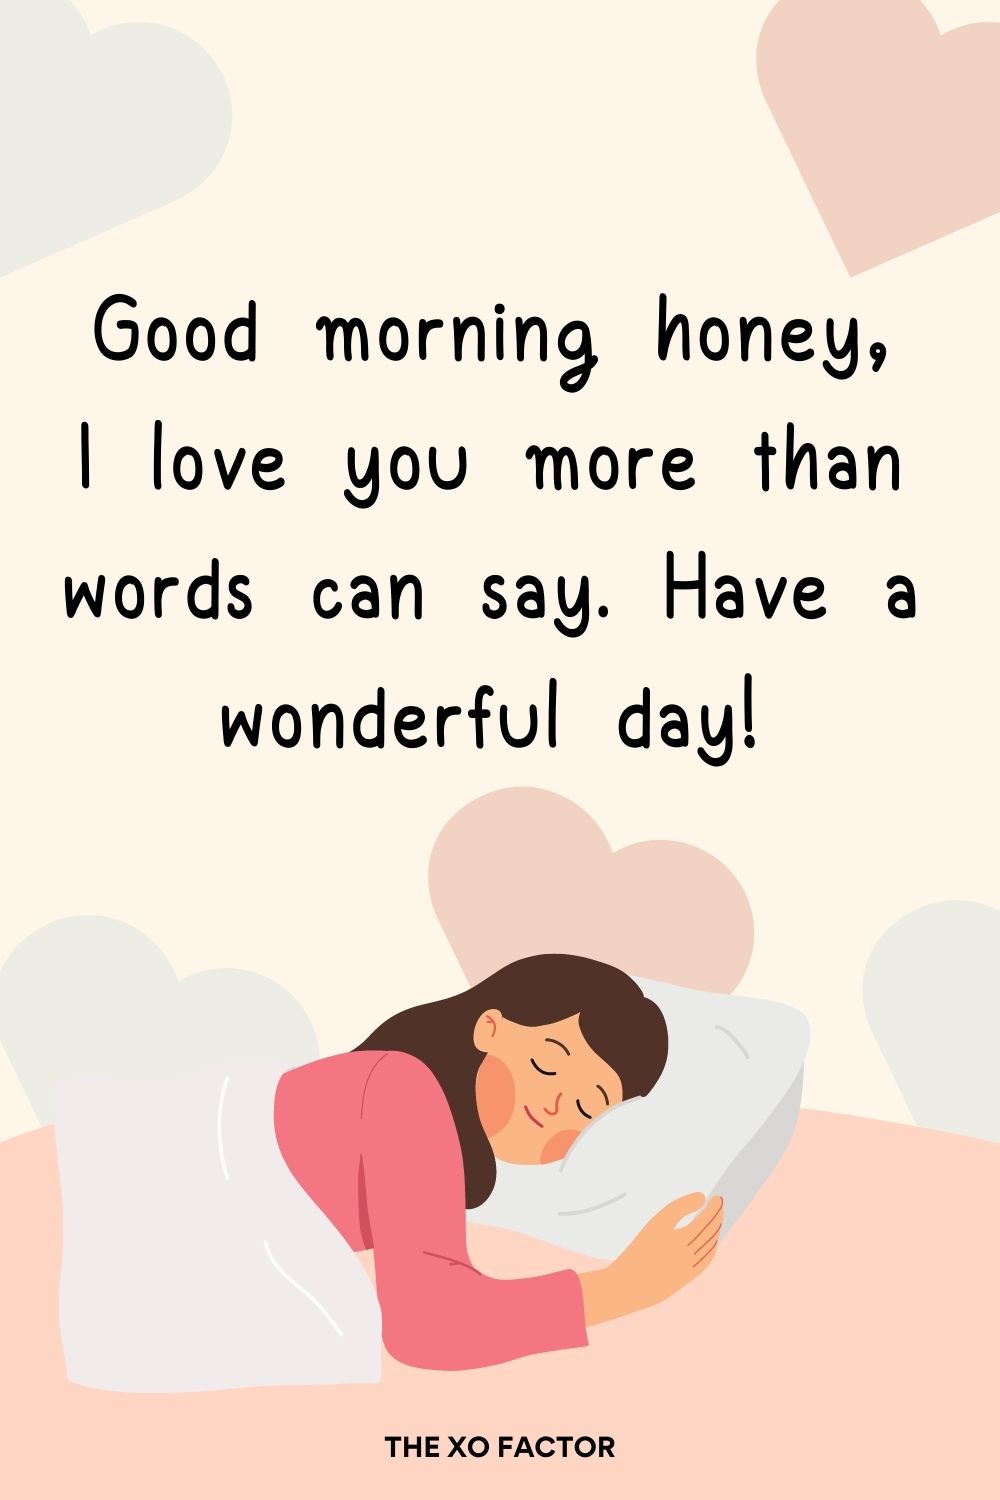 Good morning honey, I love you more than words can say. Have a wonderful day!